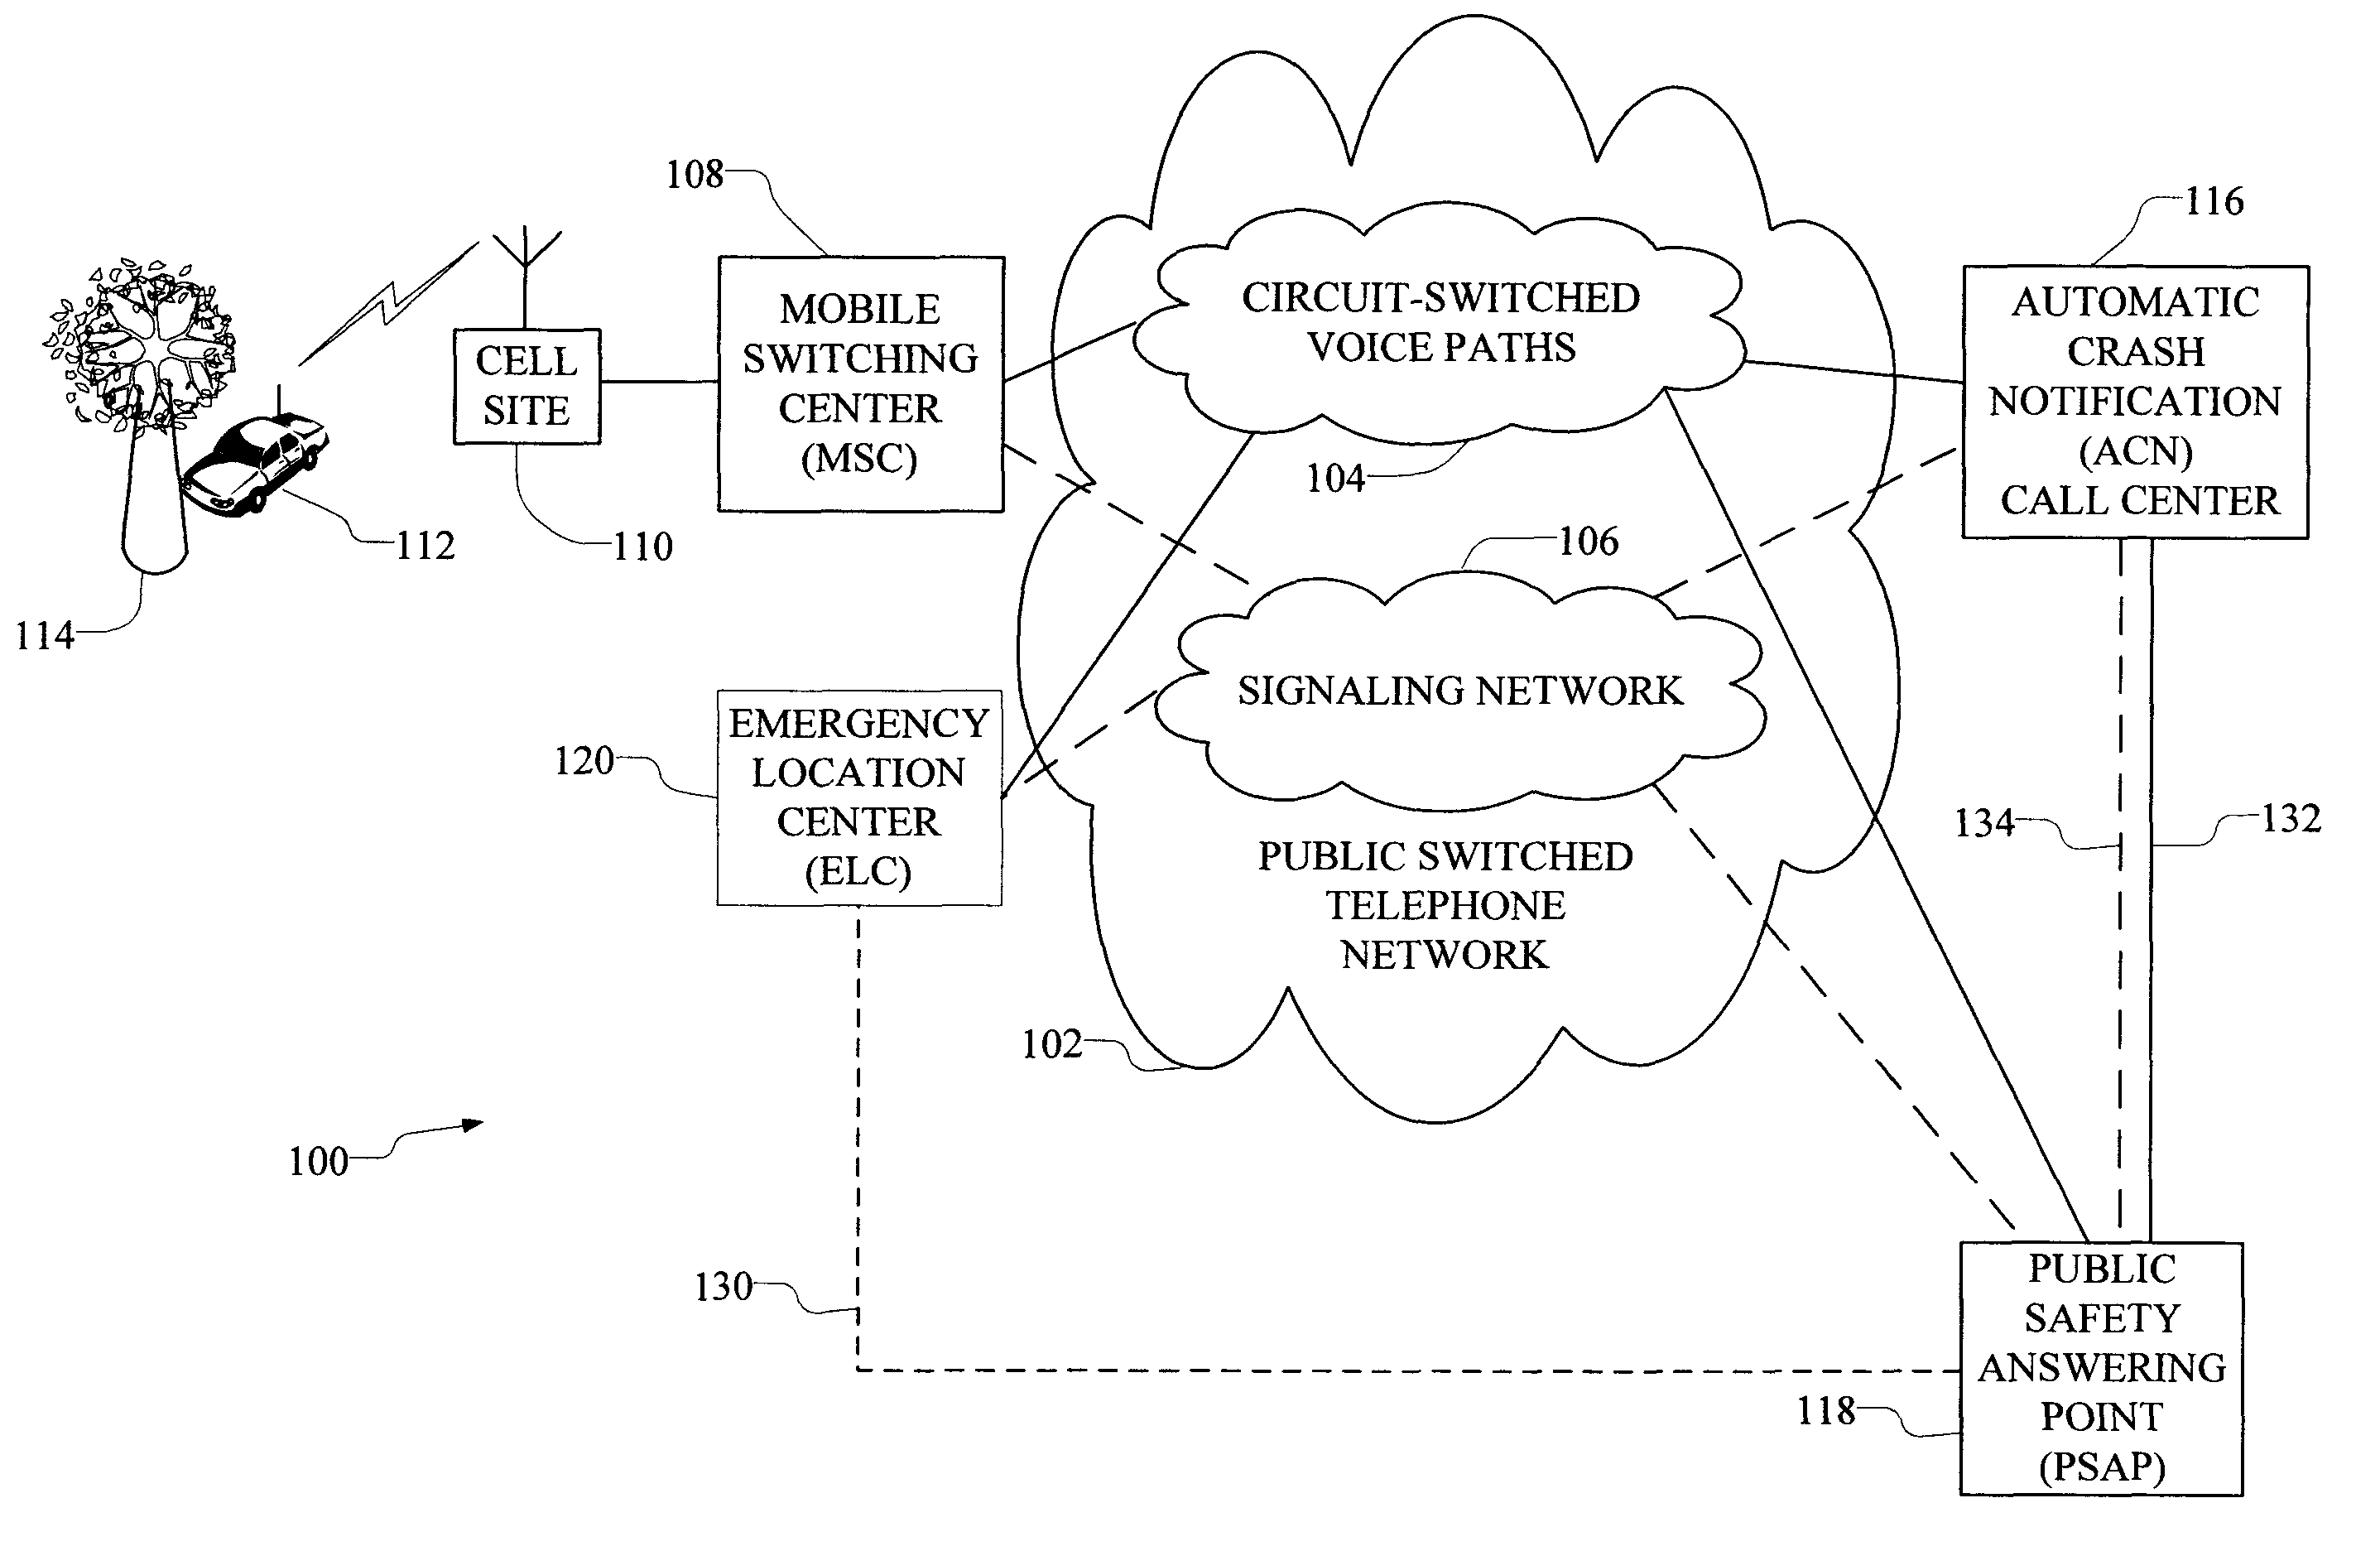 Automatic routing of in-vehicle emergency calls to automatic crash notification services and to public safety answering points